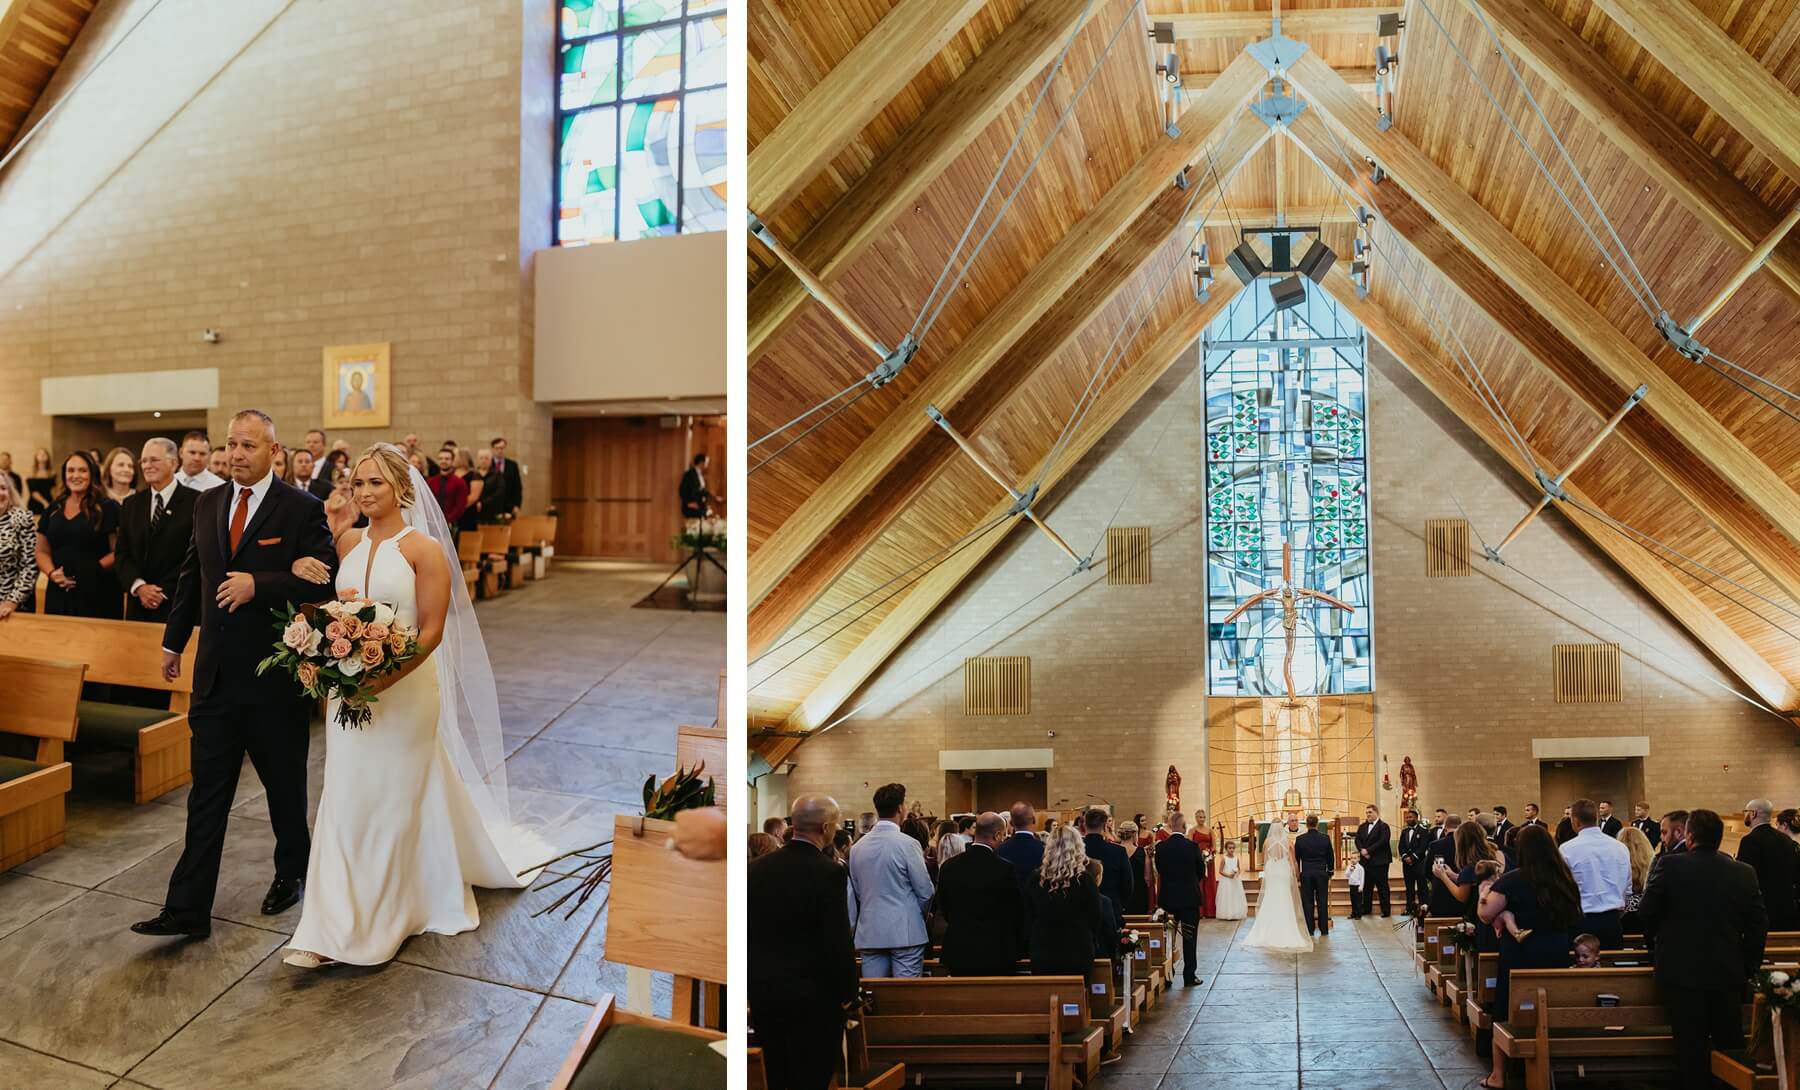 Bride walking down aisle at church then standing at altar with groom